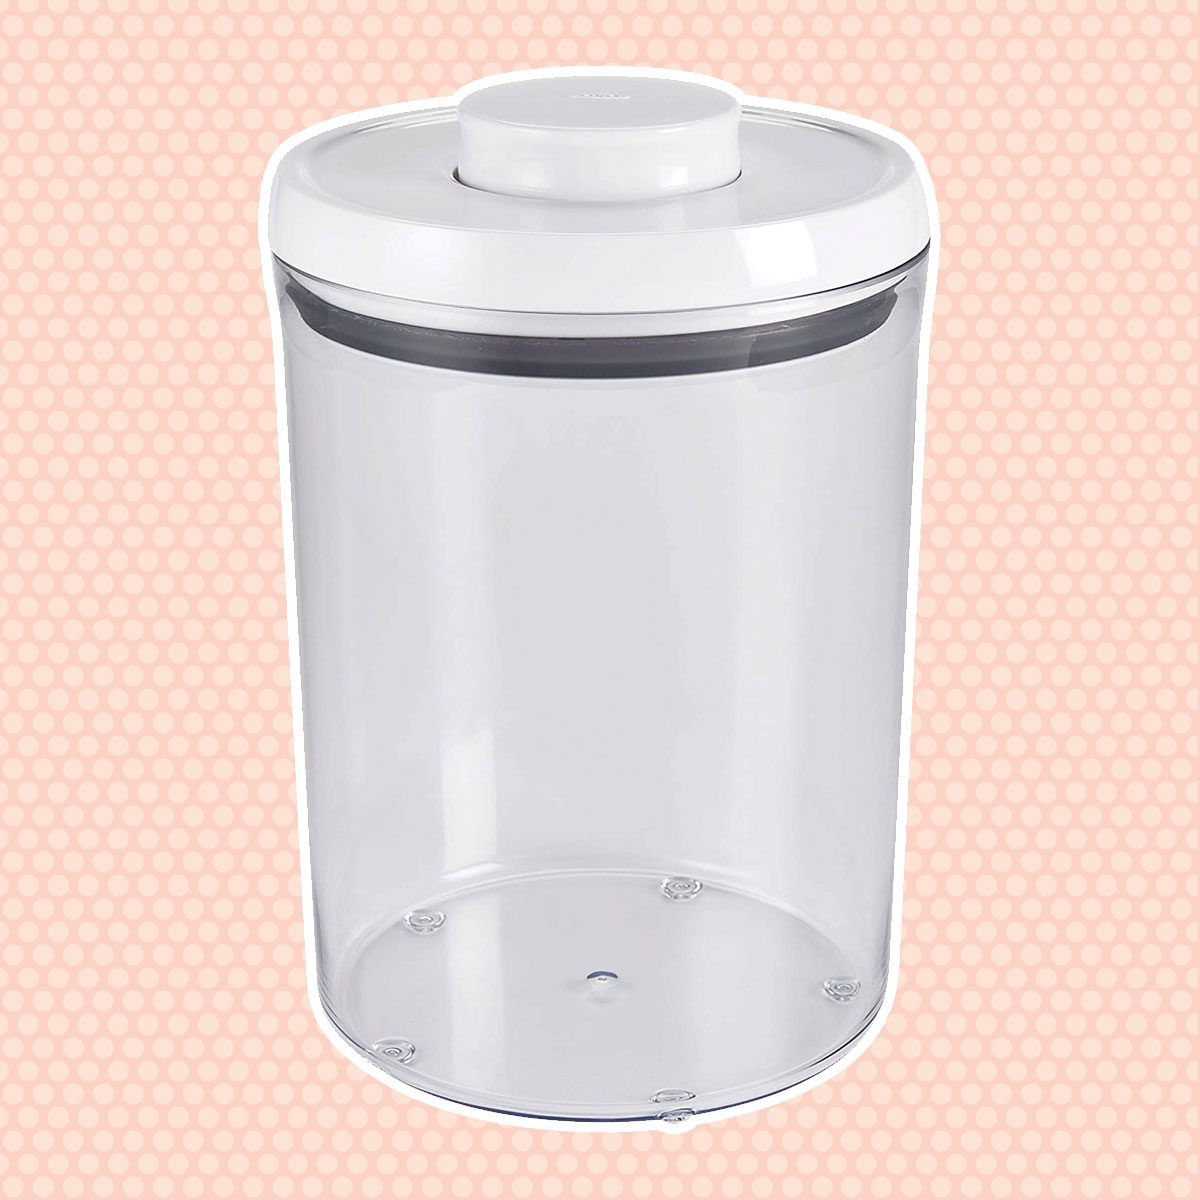 https://www.tasteofhome.com/wp-content/uploads/2020/11/OXO-POP-Round-Canister.jpg?fit=700%2C700